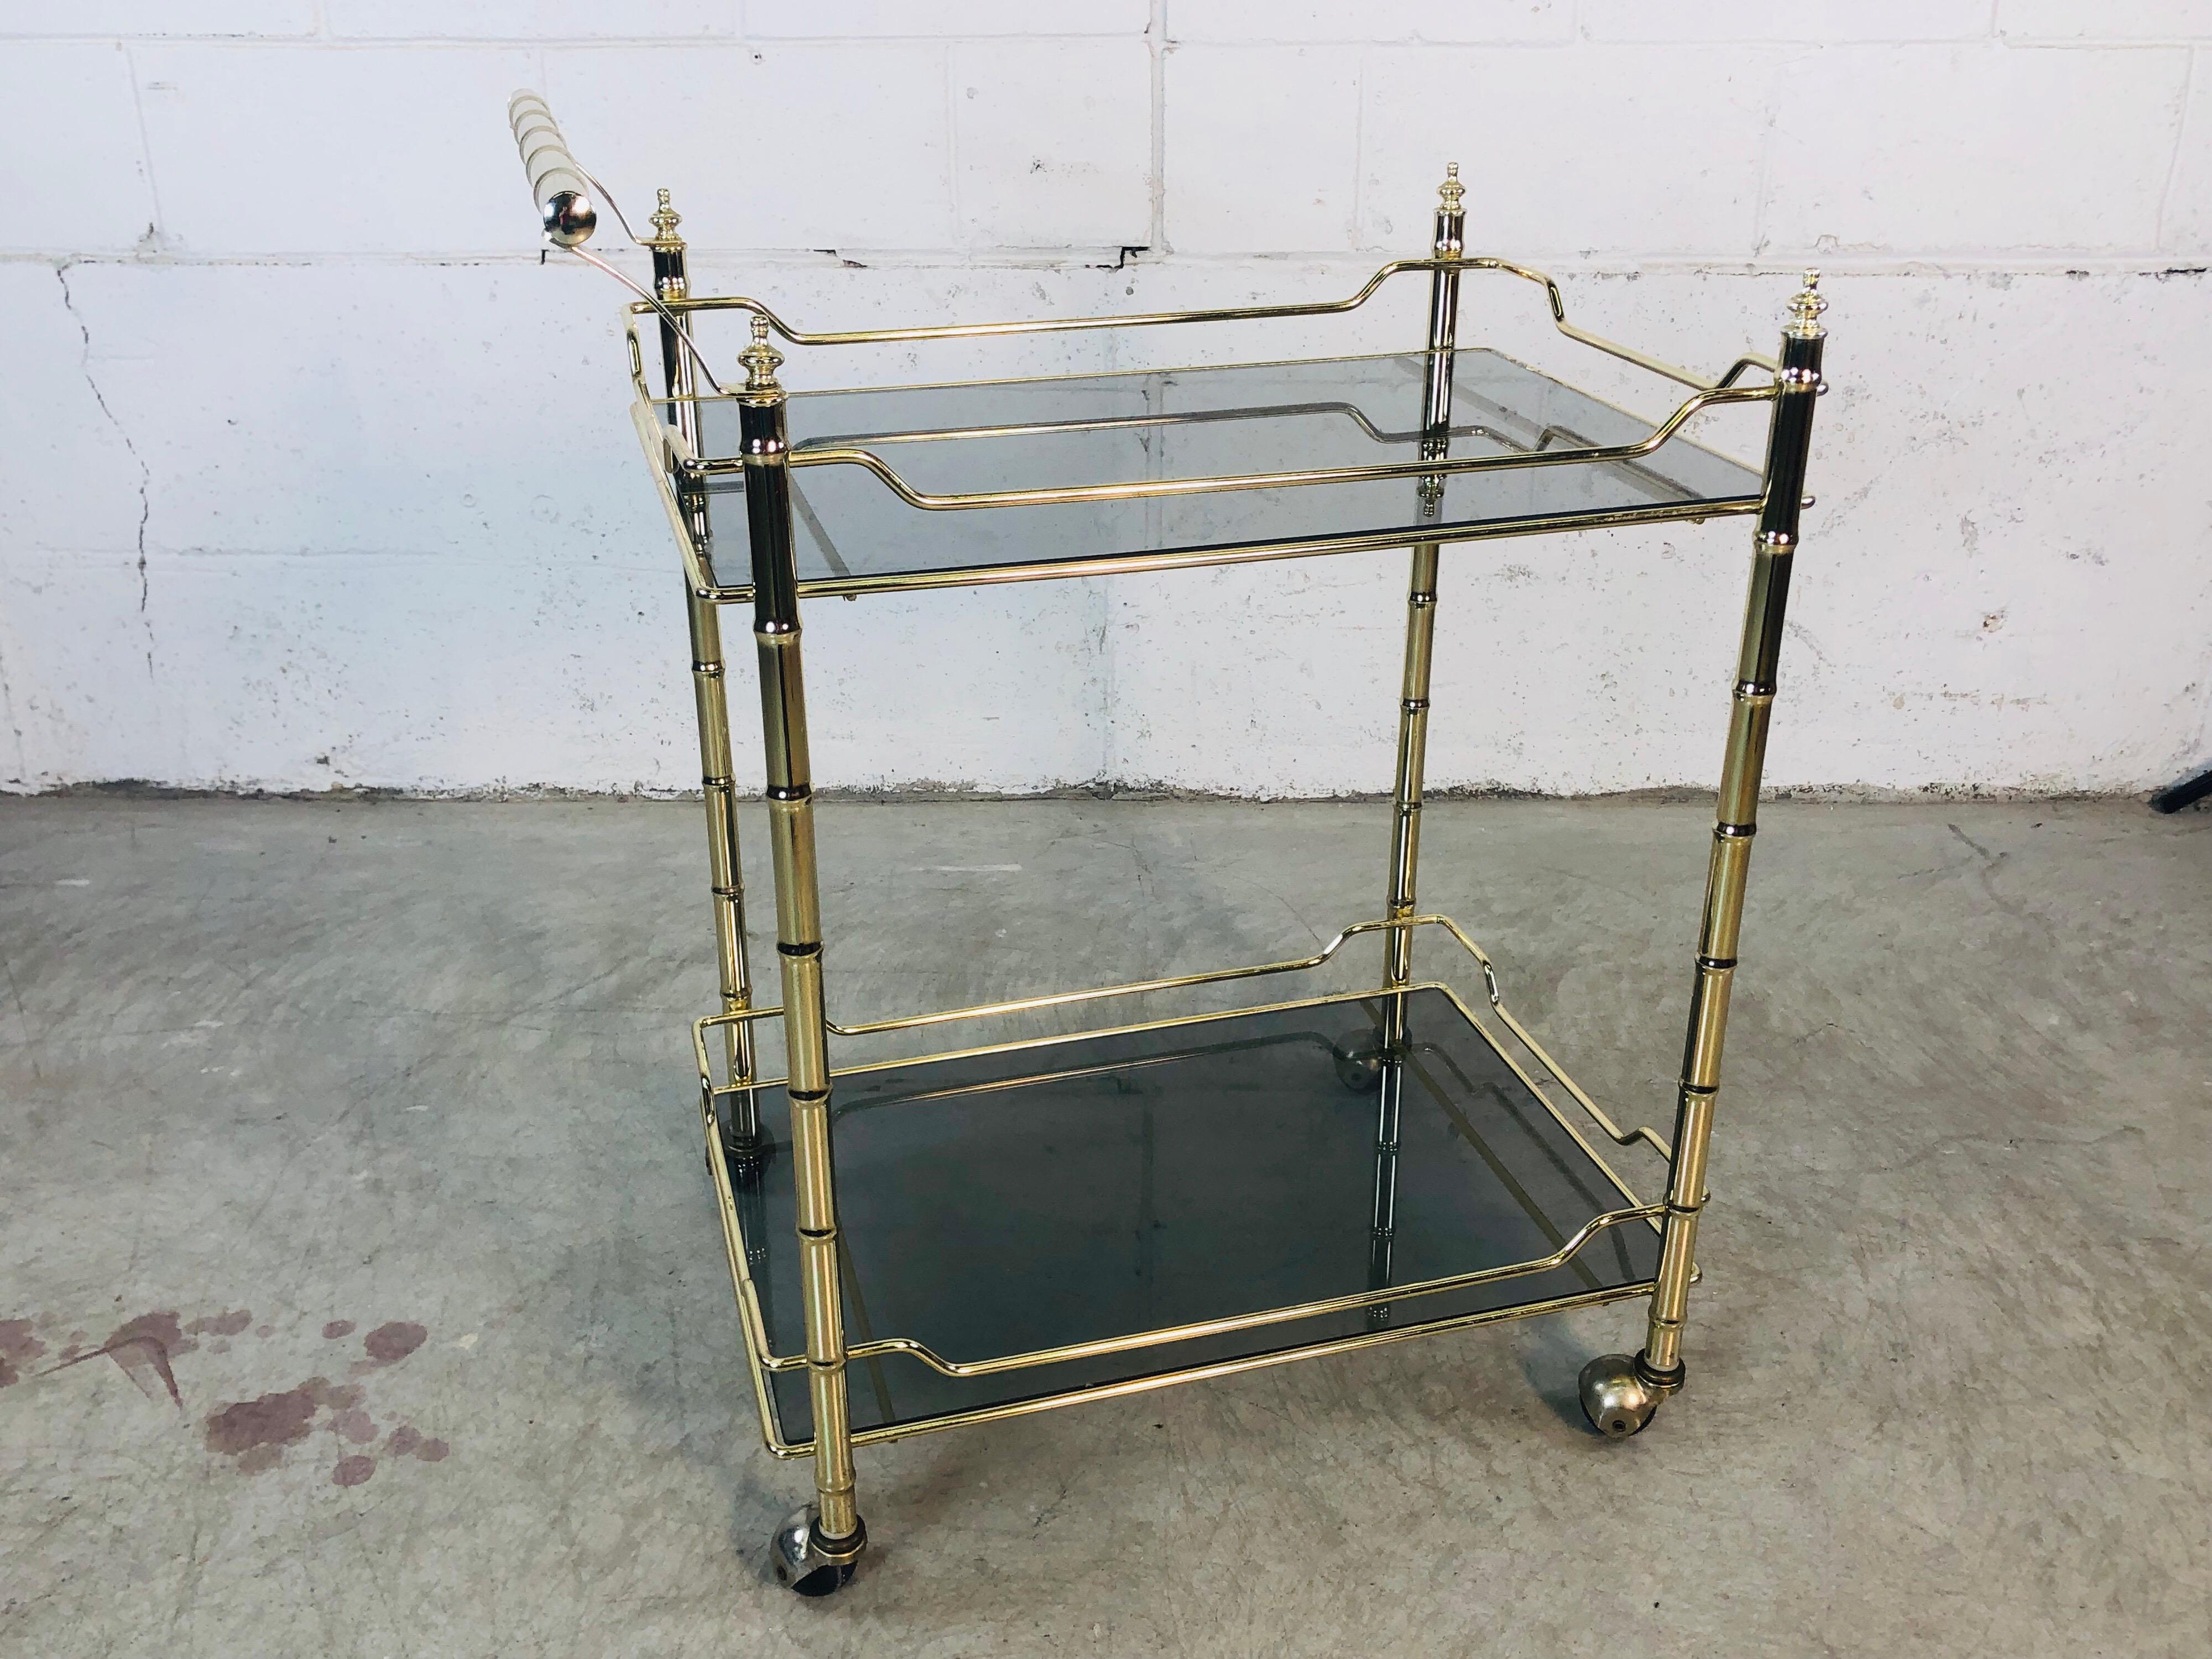 1970s Hollywood Regency gilt bamboo style rolling bar cart with smoked glass shelves. The cart is metal with glass shelves and rolls freely. Very good used condition. No makers mark.